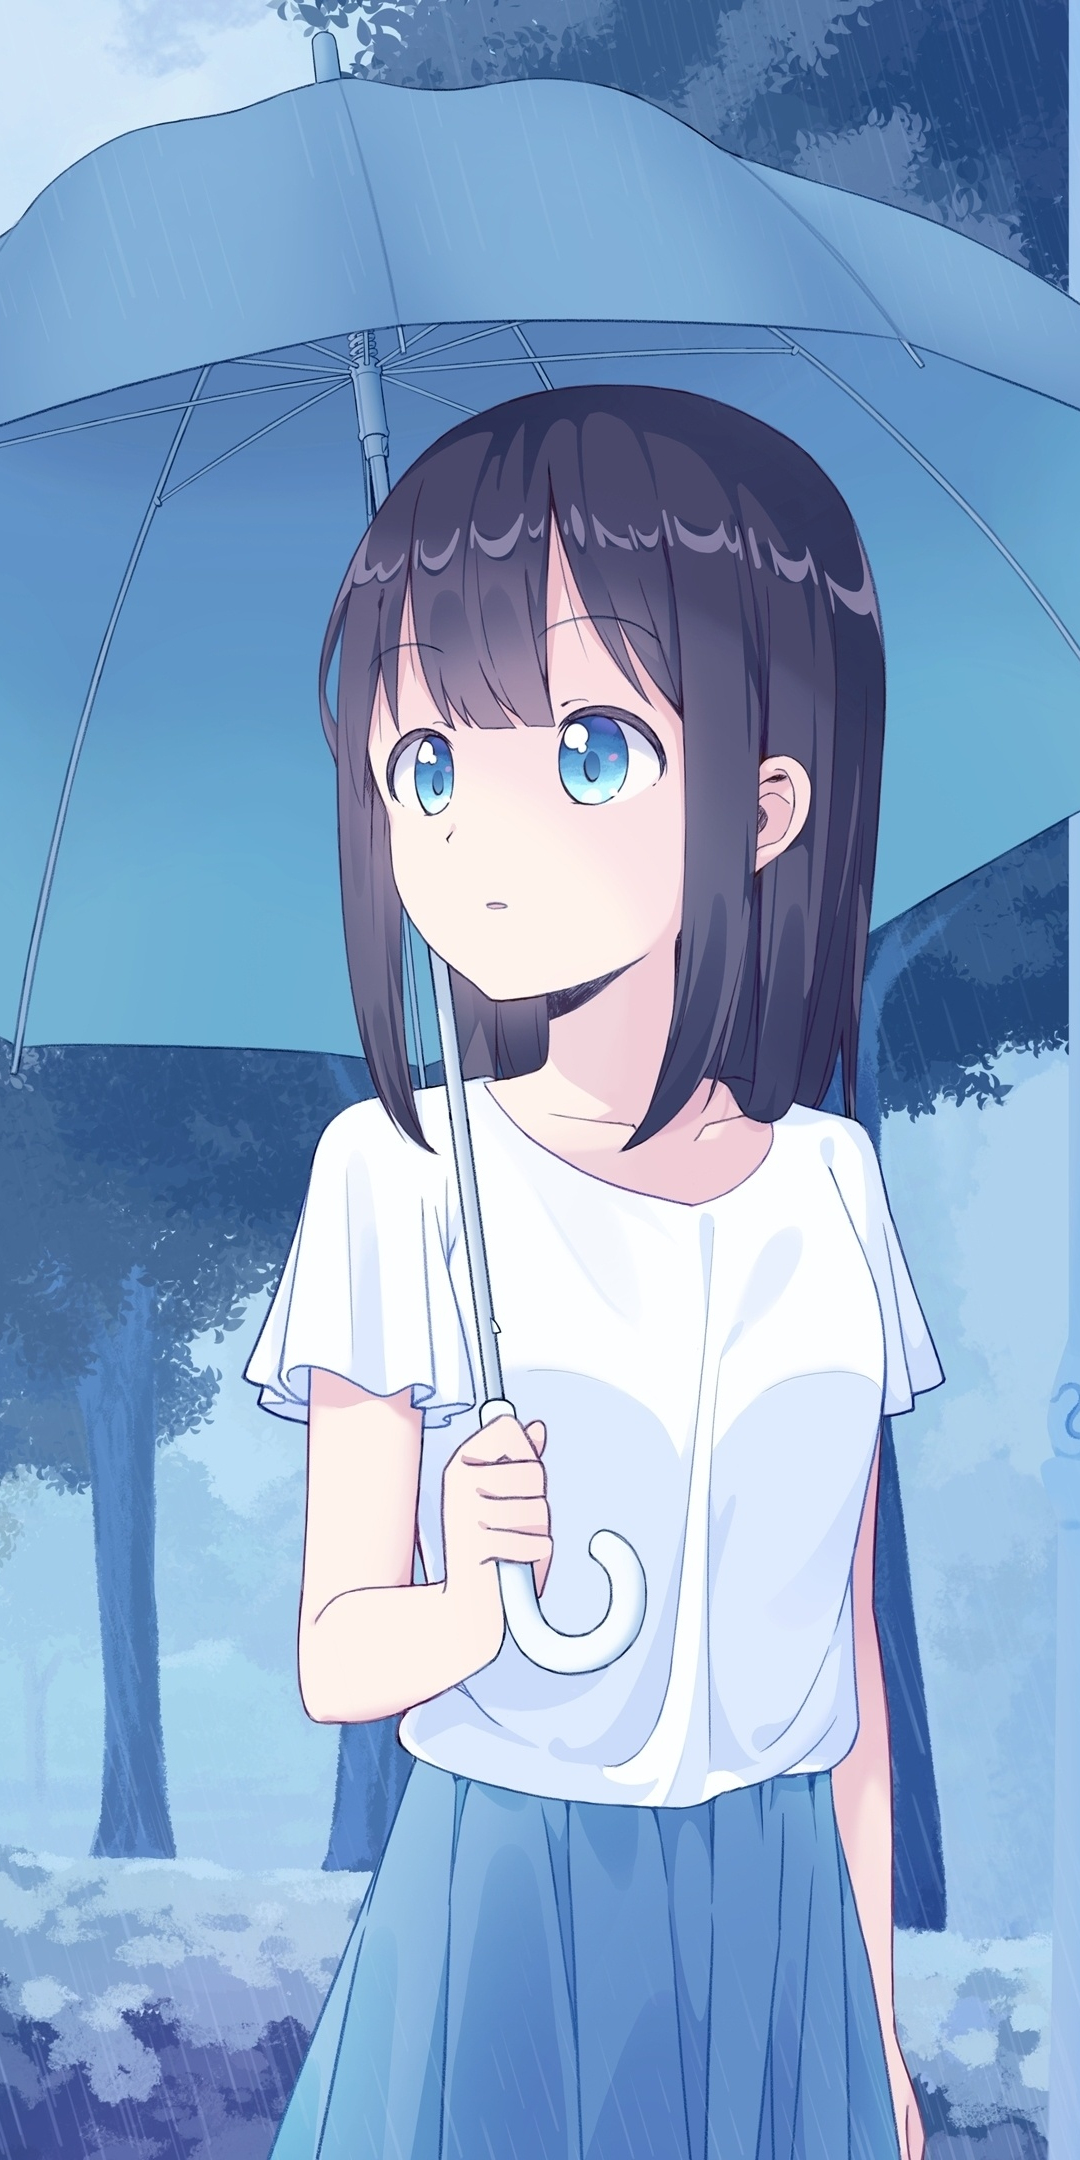 Download wallpaper 1080x2160 anime girl, cute, with umbrella, art, honor 7x, honor 9 lite, honor view 1080x2160 HD background, 18103